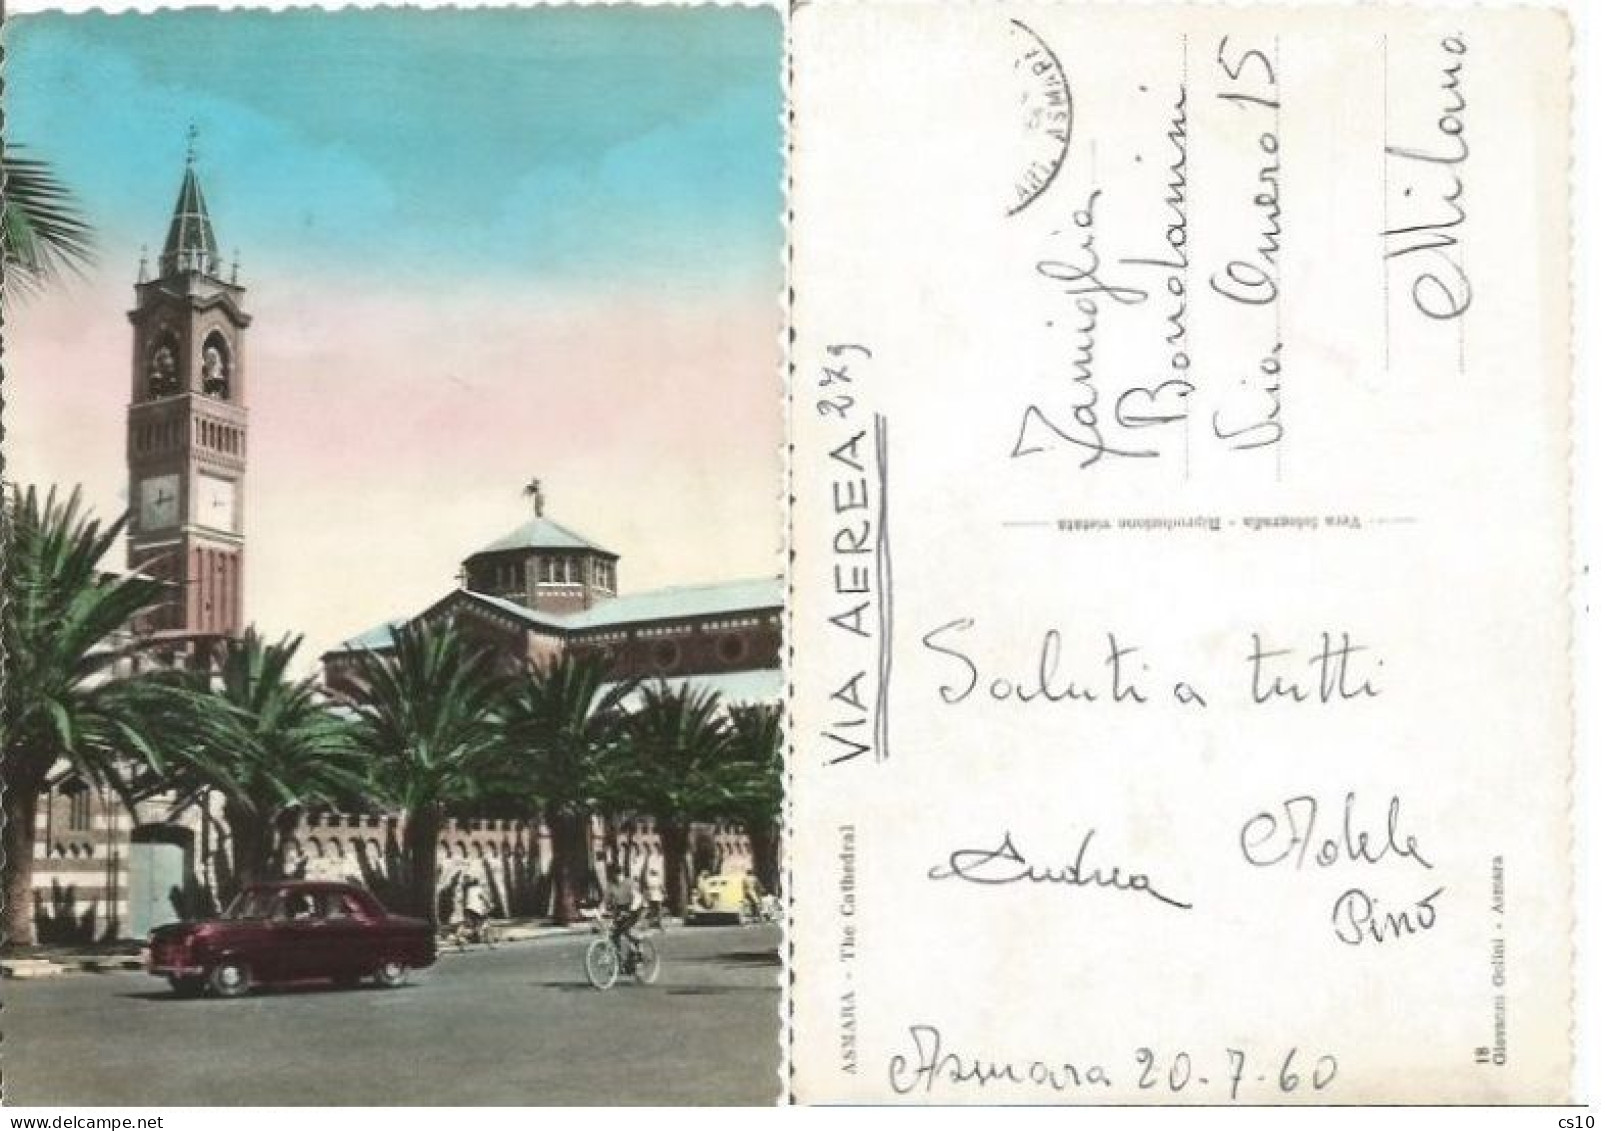 Eritrea (Ethiopia Period) Asmara Cathedral + Cars & Bicycles - Stampless Color Airmail Pcard 20jul1960 To Italy - Ethiopië